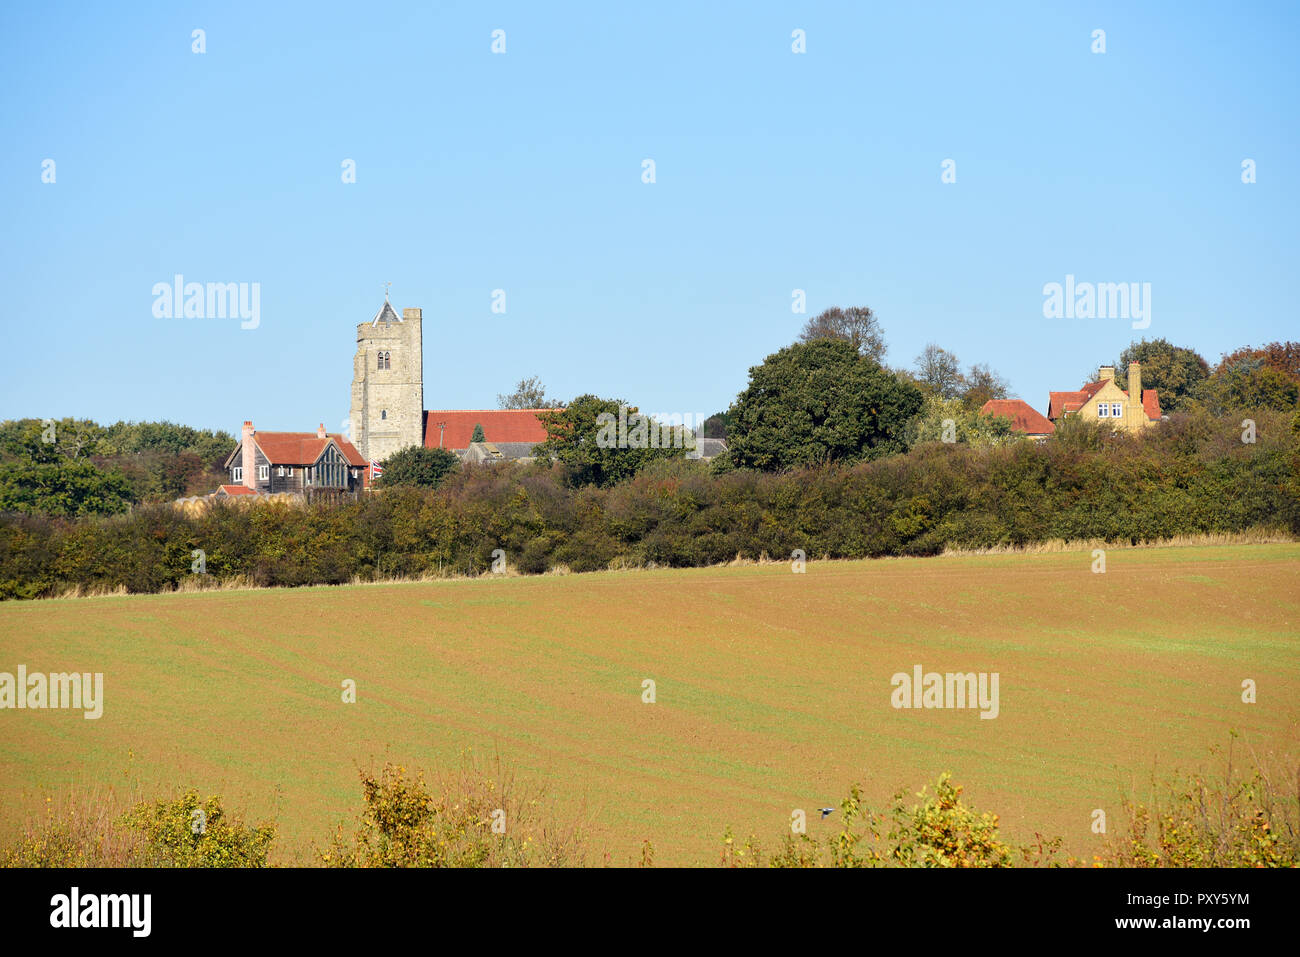 All Saints Church, Rettendon, Essex, UK. English countryside with field, hedges and trees. Blue sky with space for copy Stock Photo